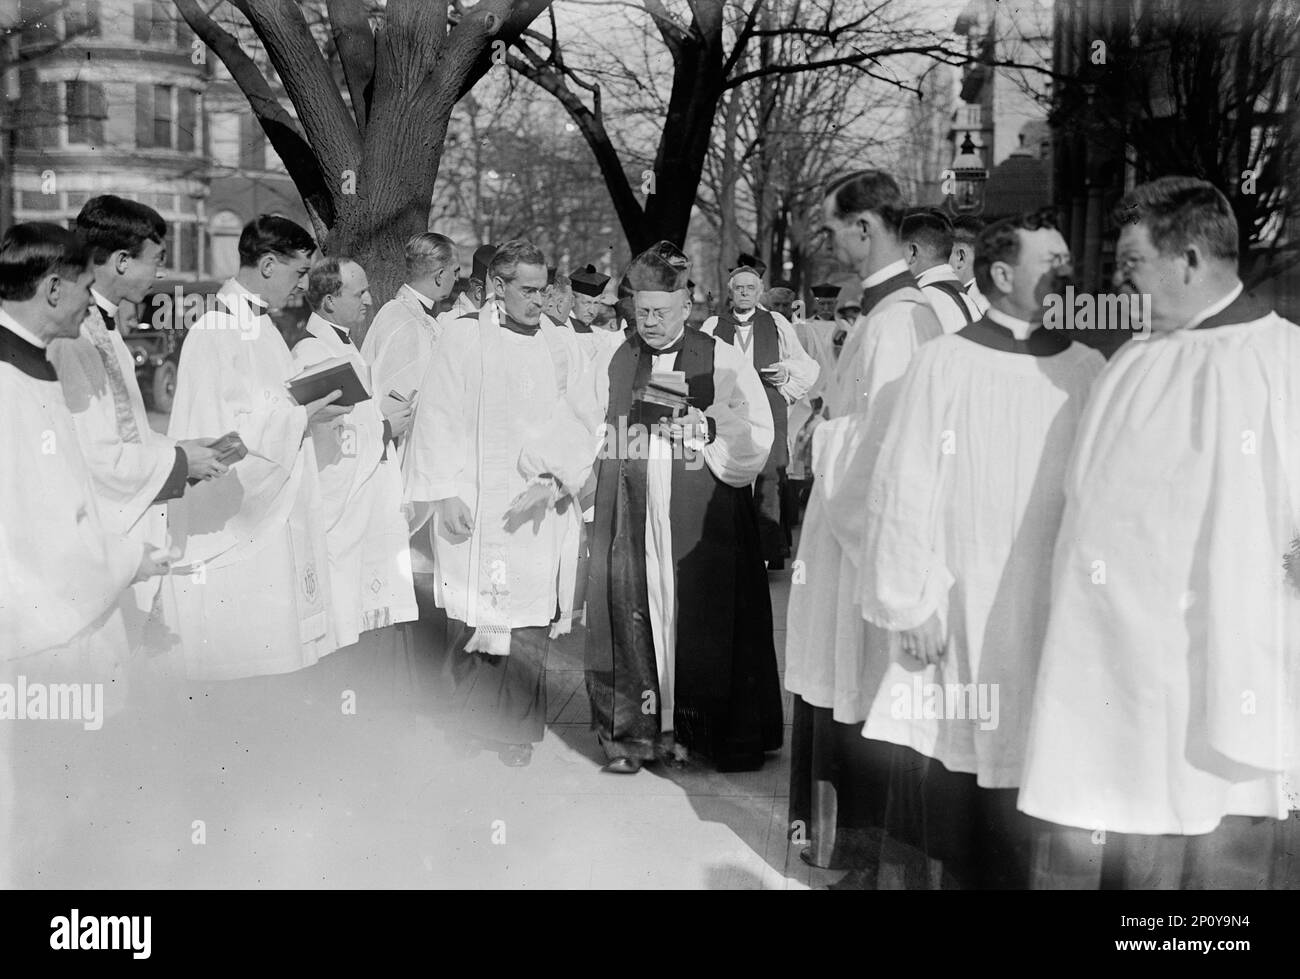 Saint Thomas P.E. Church - Consecration Services, Dec 1912. 2nd from Left, Rev. Dr. George W. Atkinson; 3rd, Rev. Charles T. Warner; 4th, Rev. Joseph E. Williams; 5th, Nelms, Choir Master; 6th, Bishop Alfred Harding, Officiating; 7th, Bishop Wood, English Bishop of Jamaica. Protestant Episcopal church in Washington DC. Stock Photo